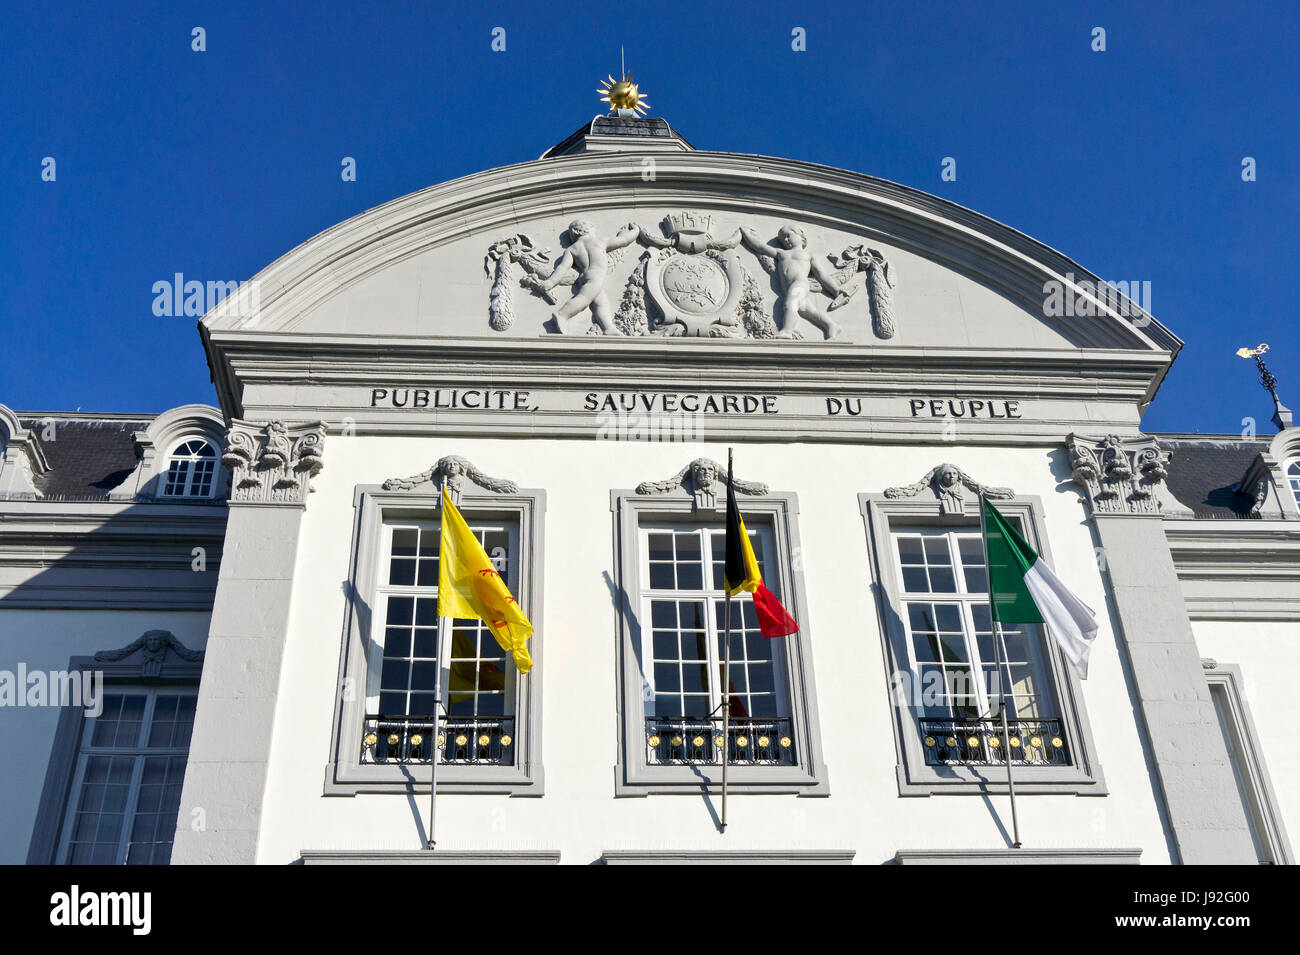 historical, city, town, town hall, belgium, style of construction, Stock Photo